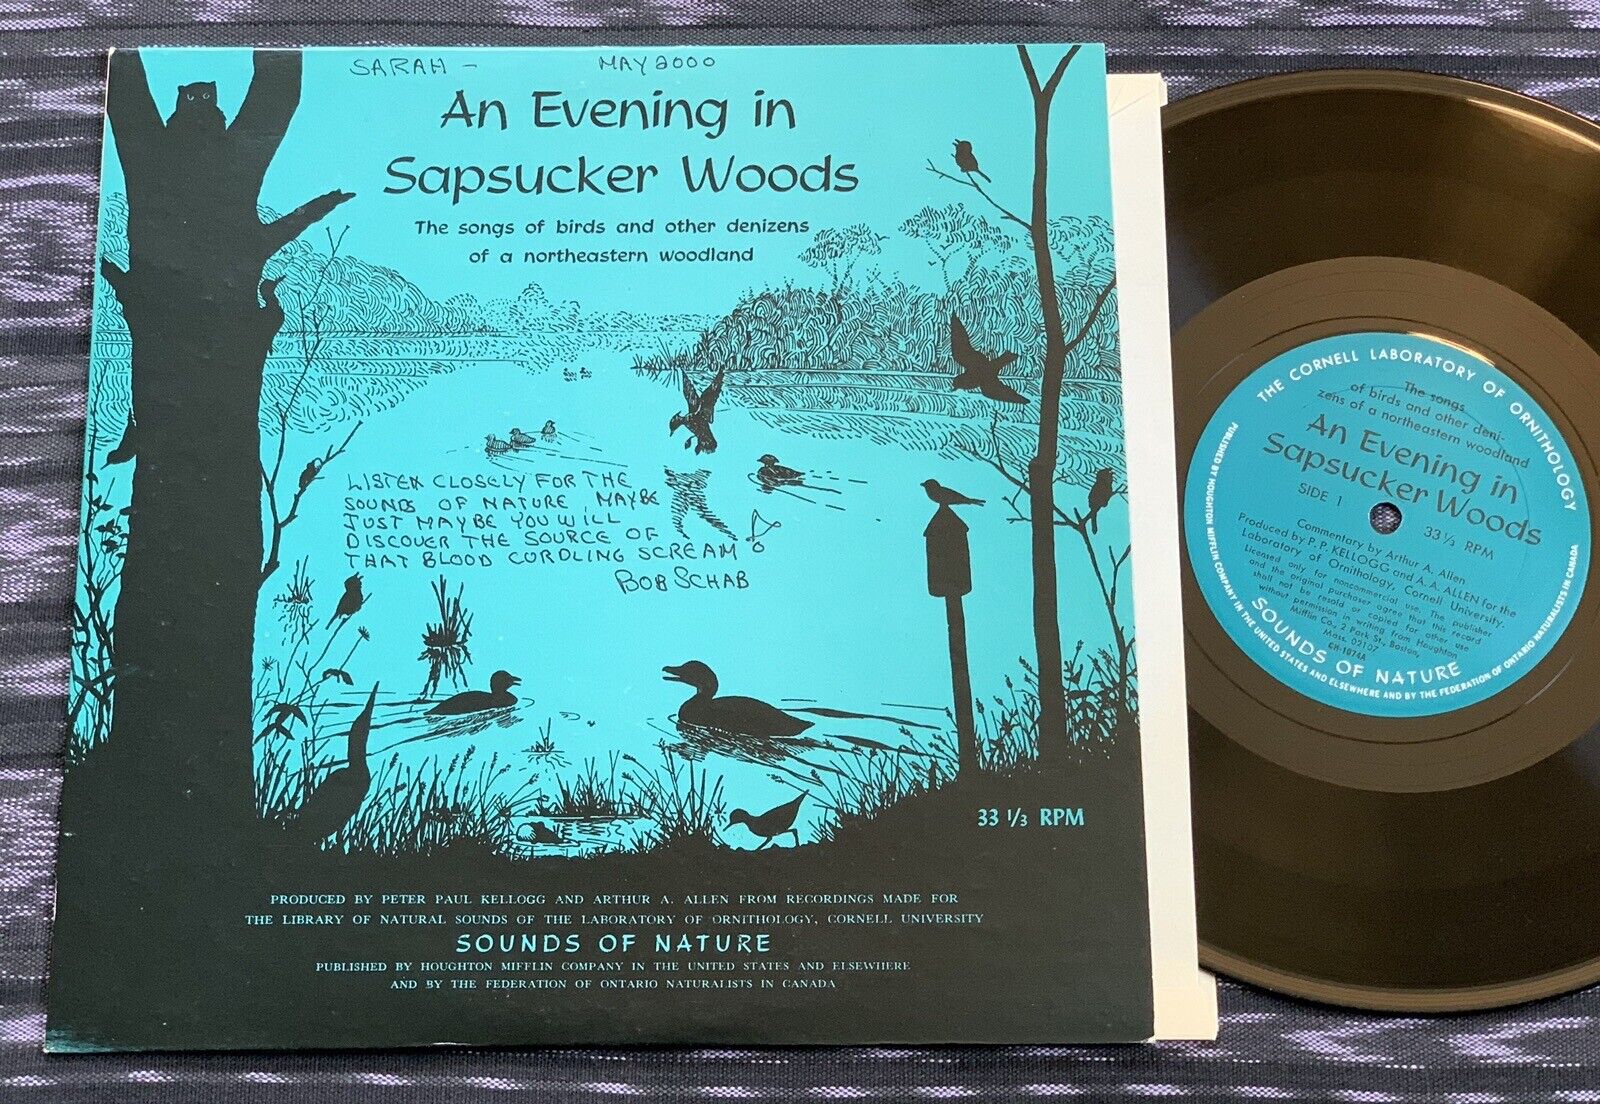 10” LP EX AN EVENING IN SAPSUCKER WOODS Ornithology CORNELL Sounds Of Nature 33